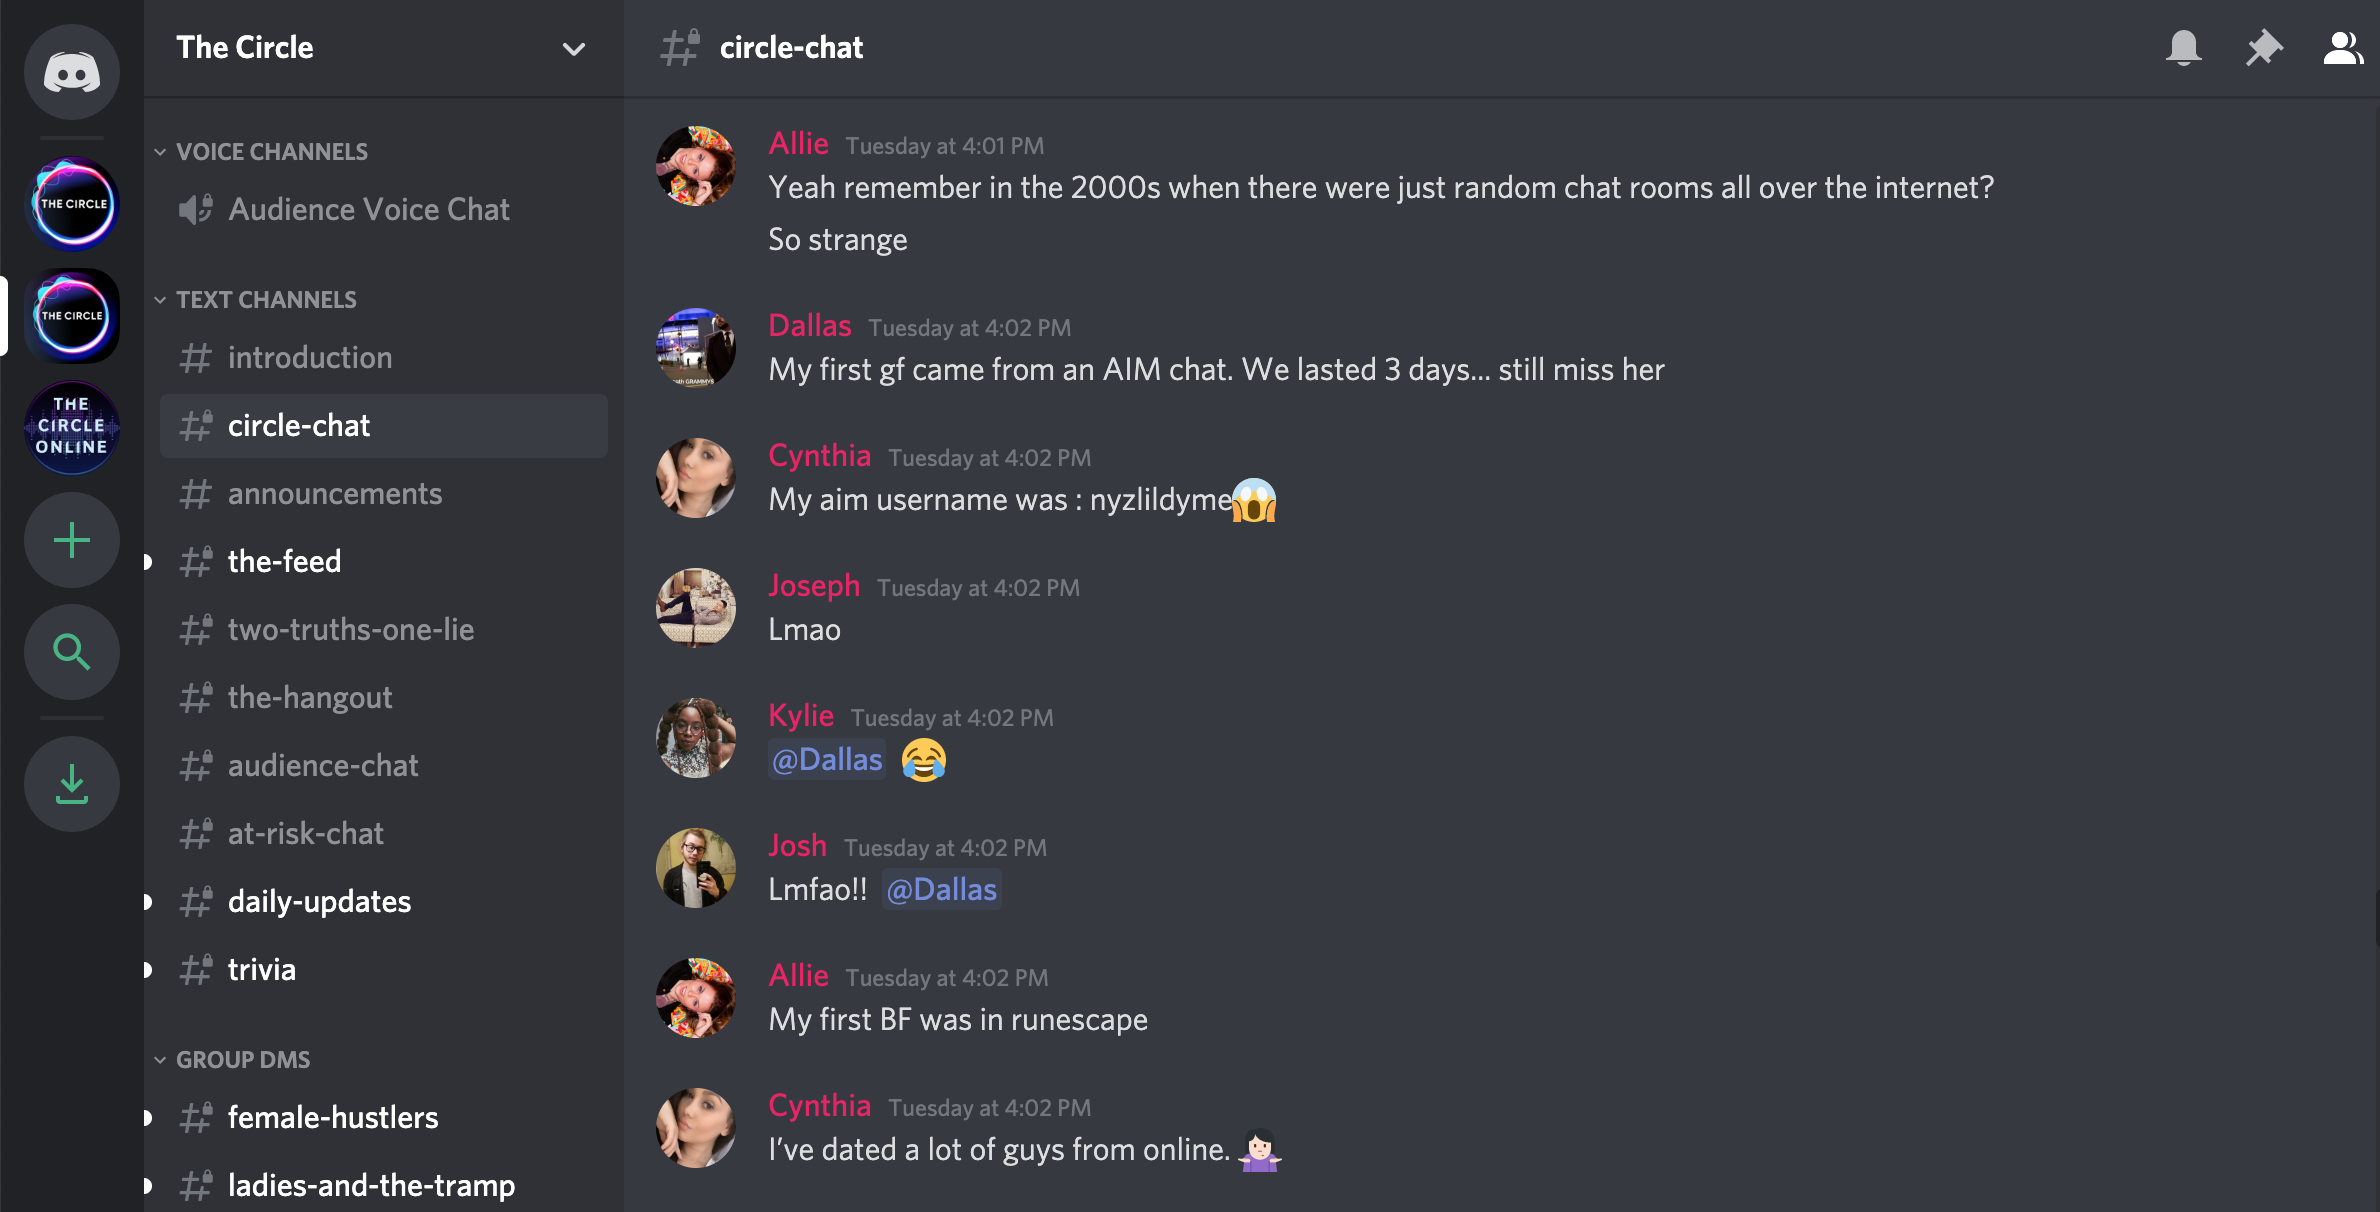 A screenshot of the #circle-chat on the "The Circle" server